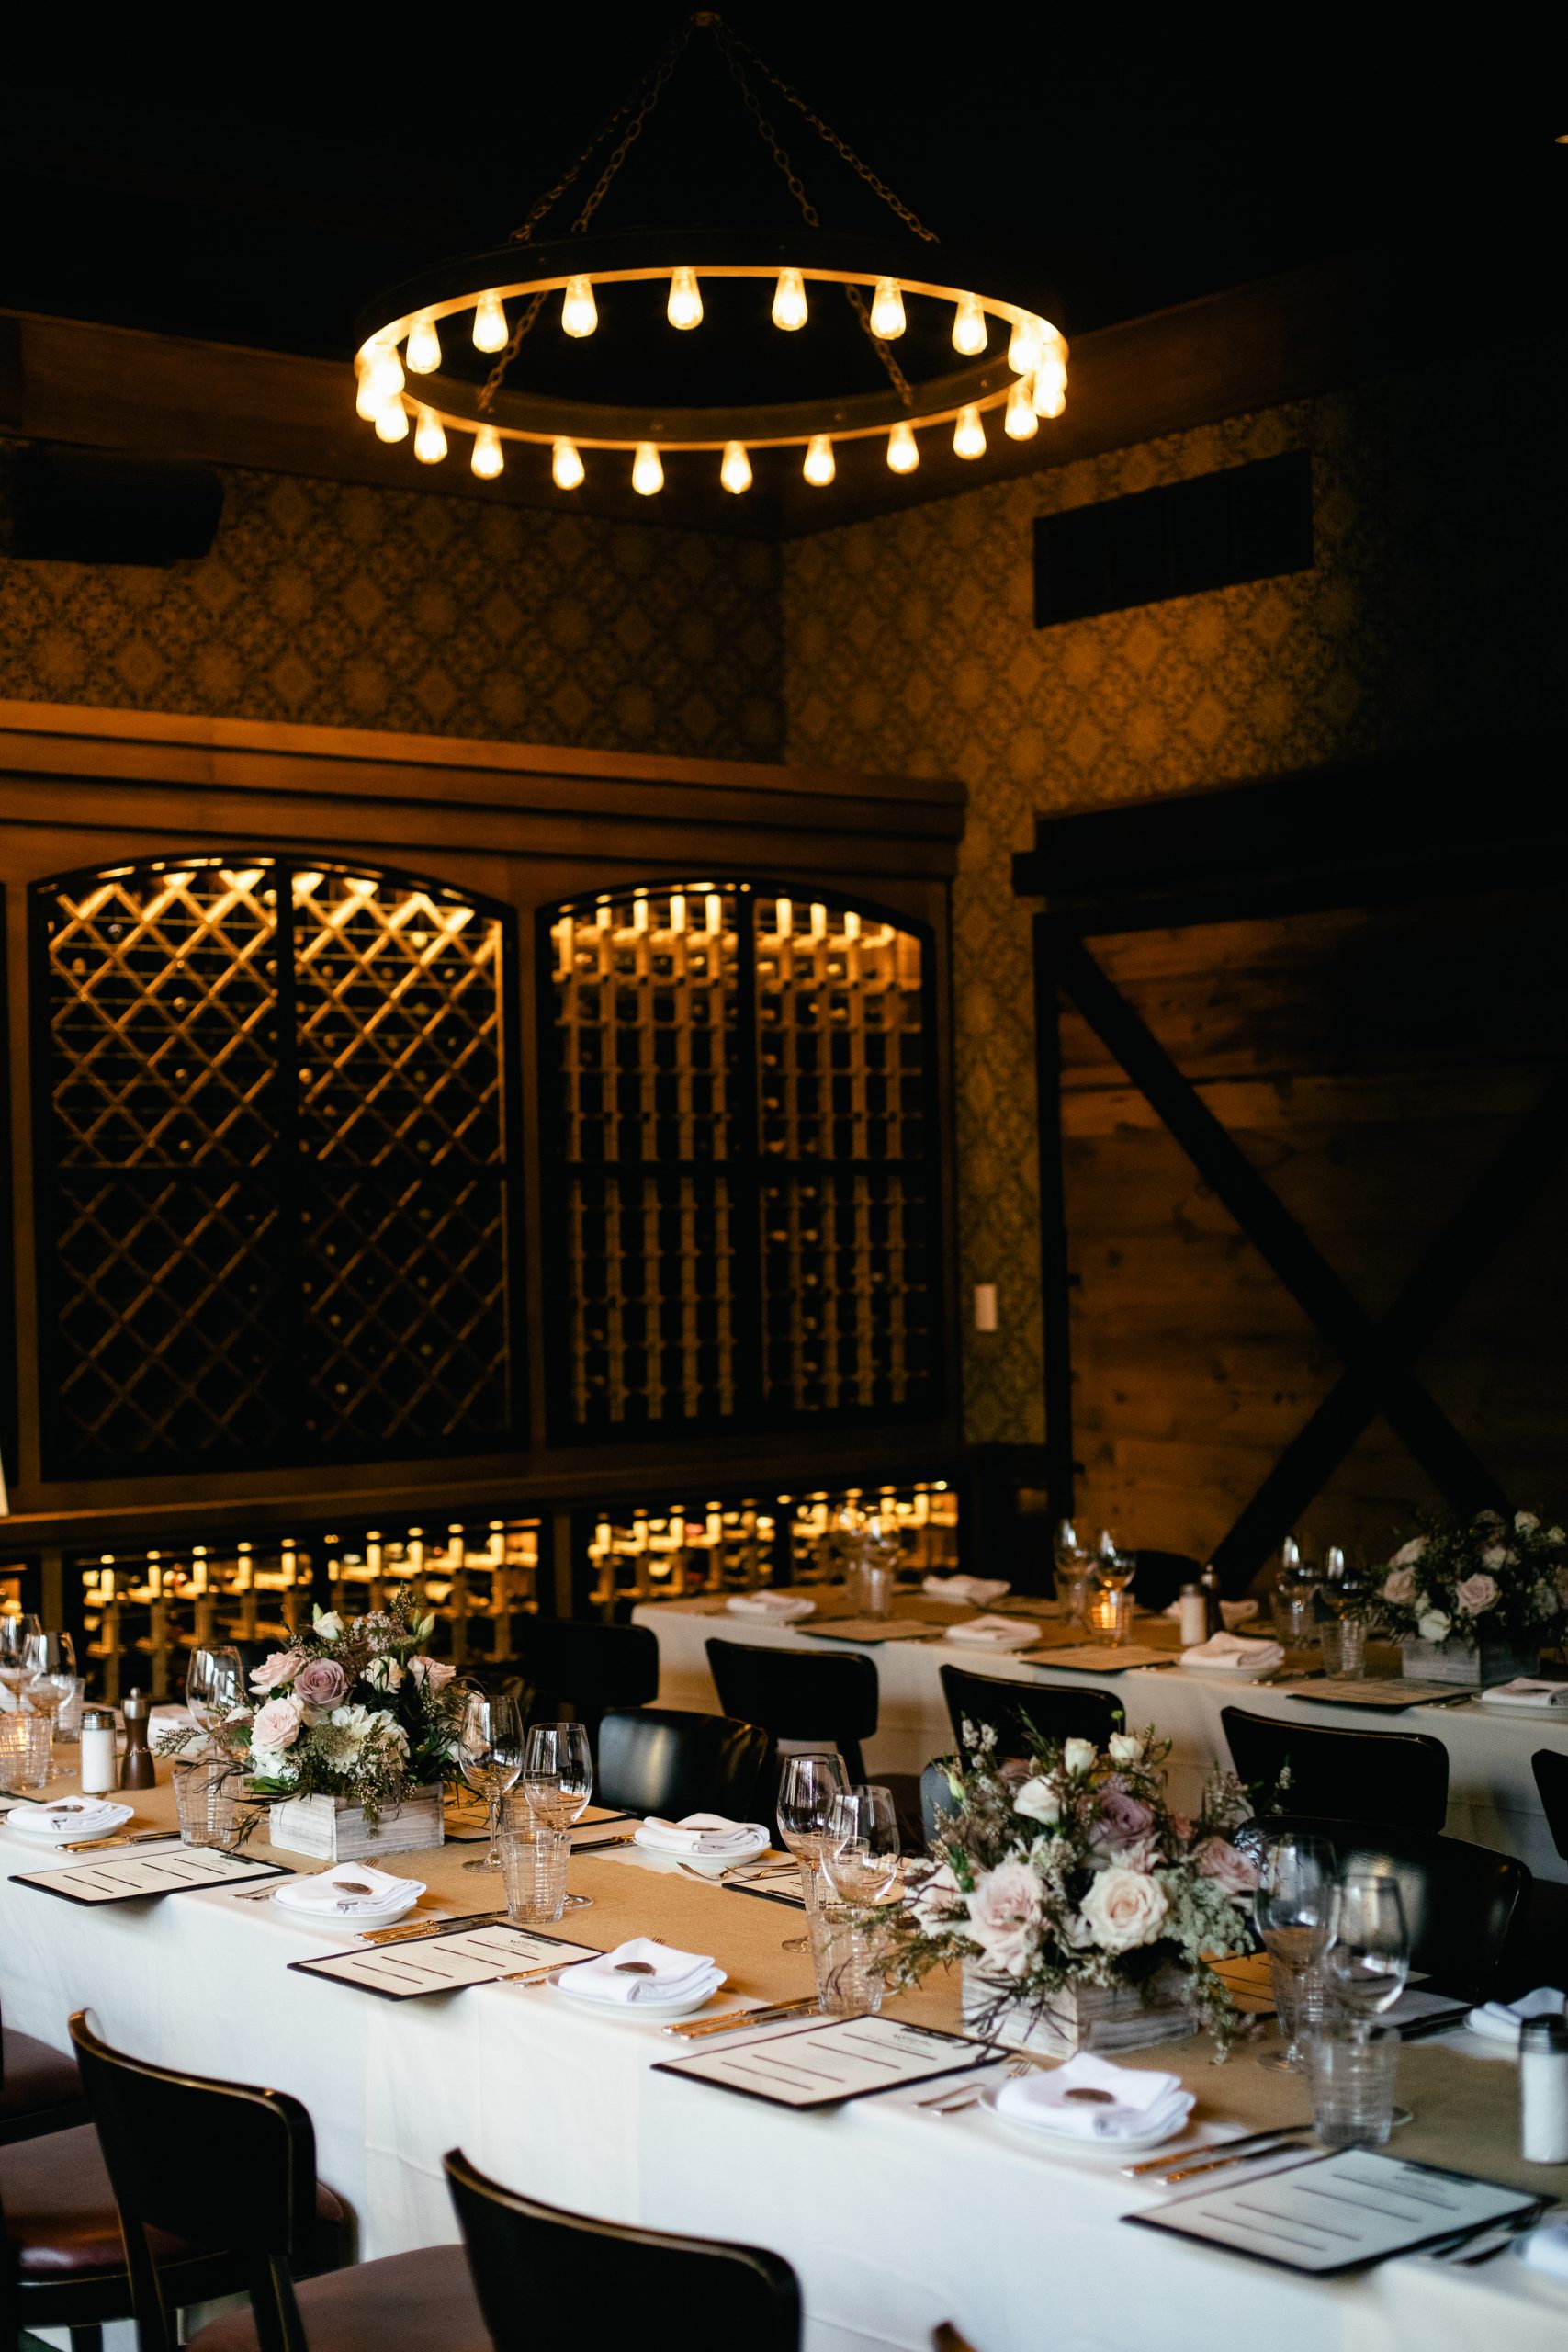 Moody wedding reception in a private room.